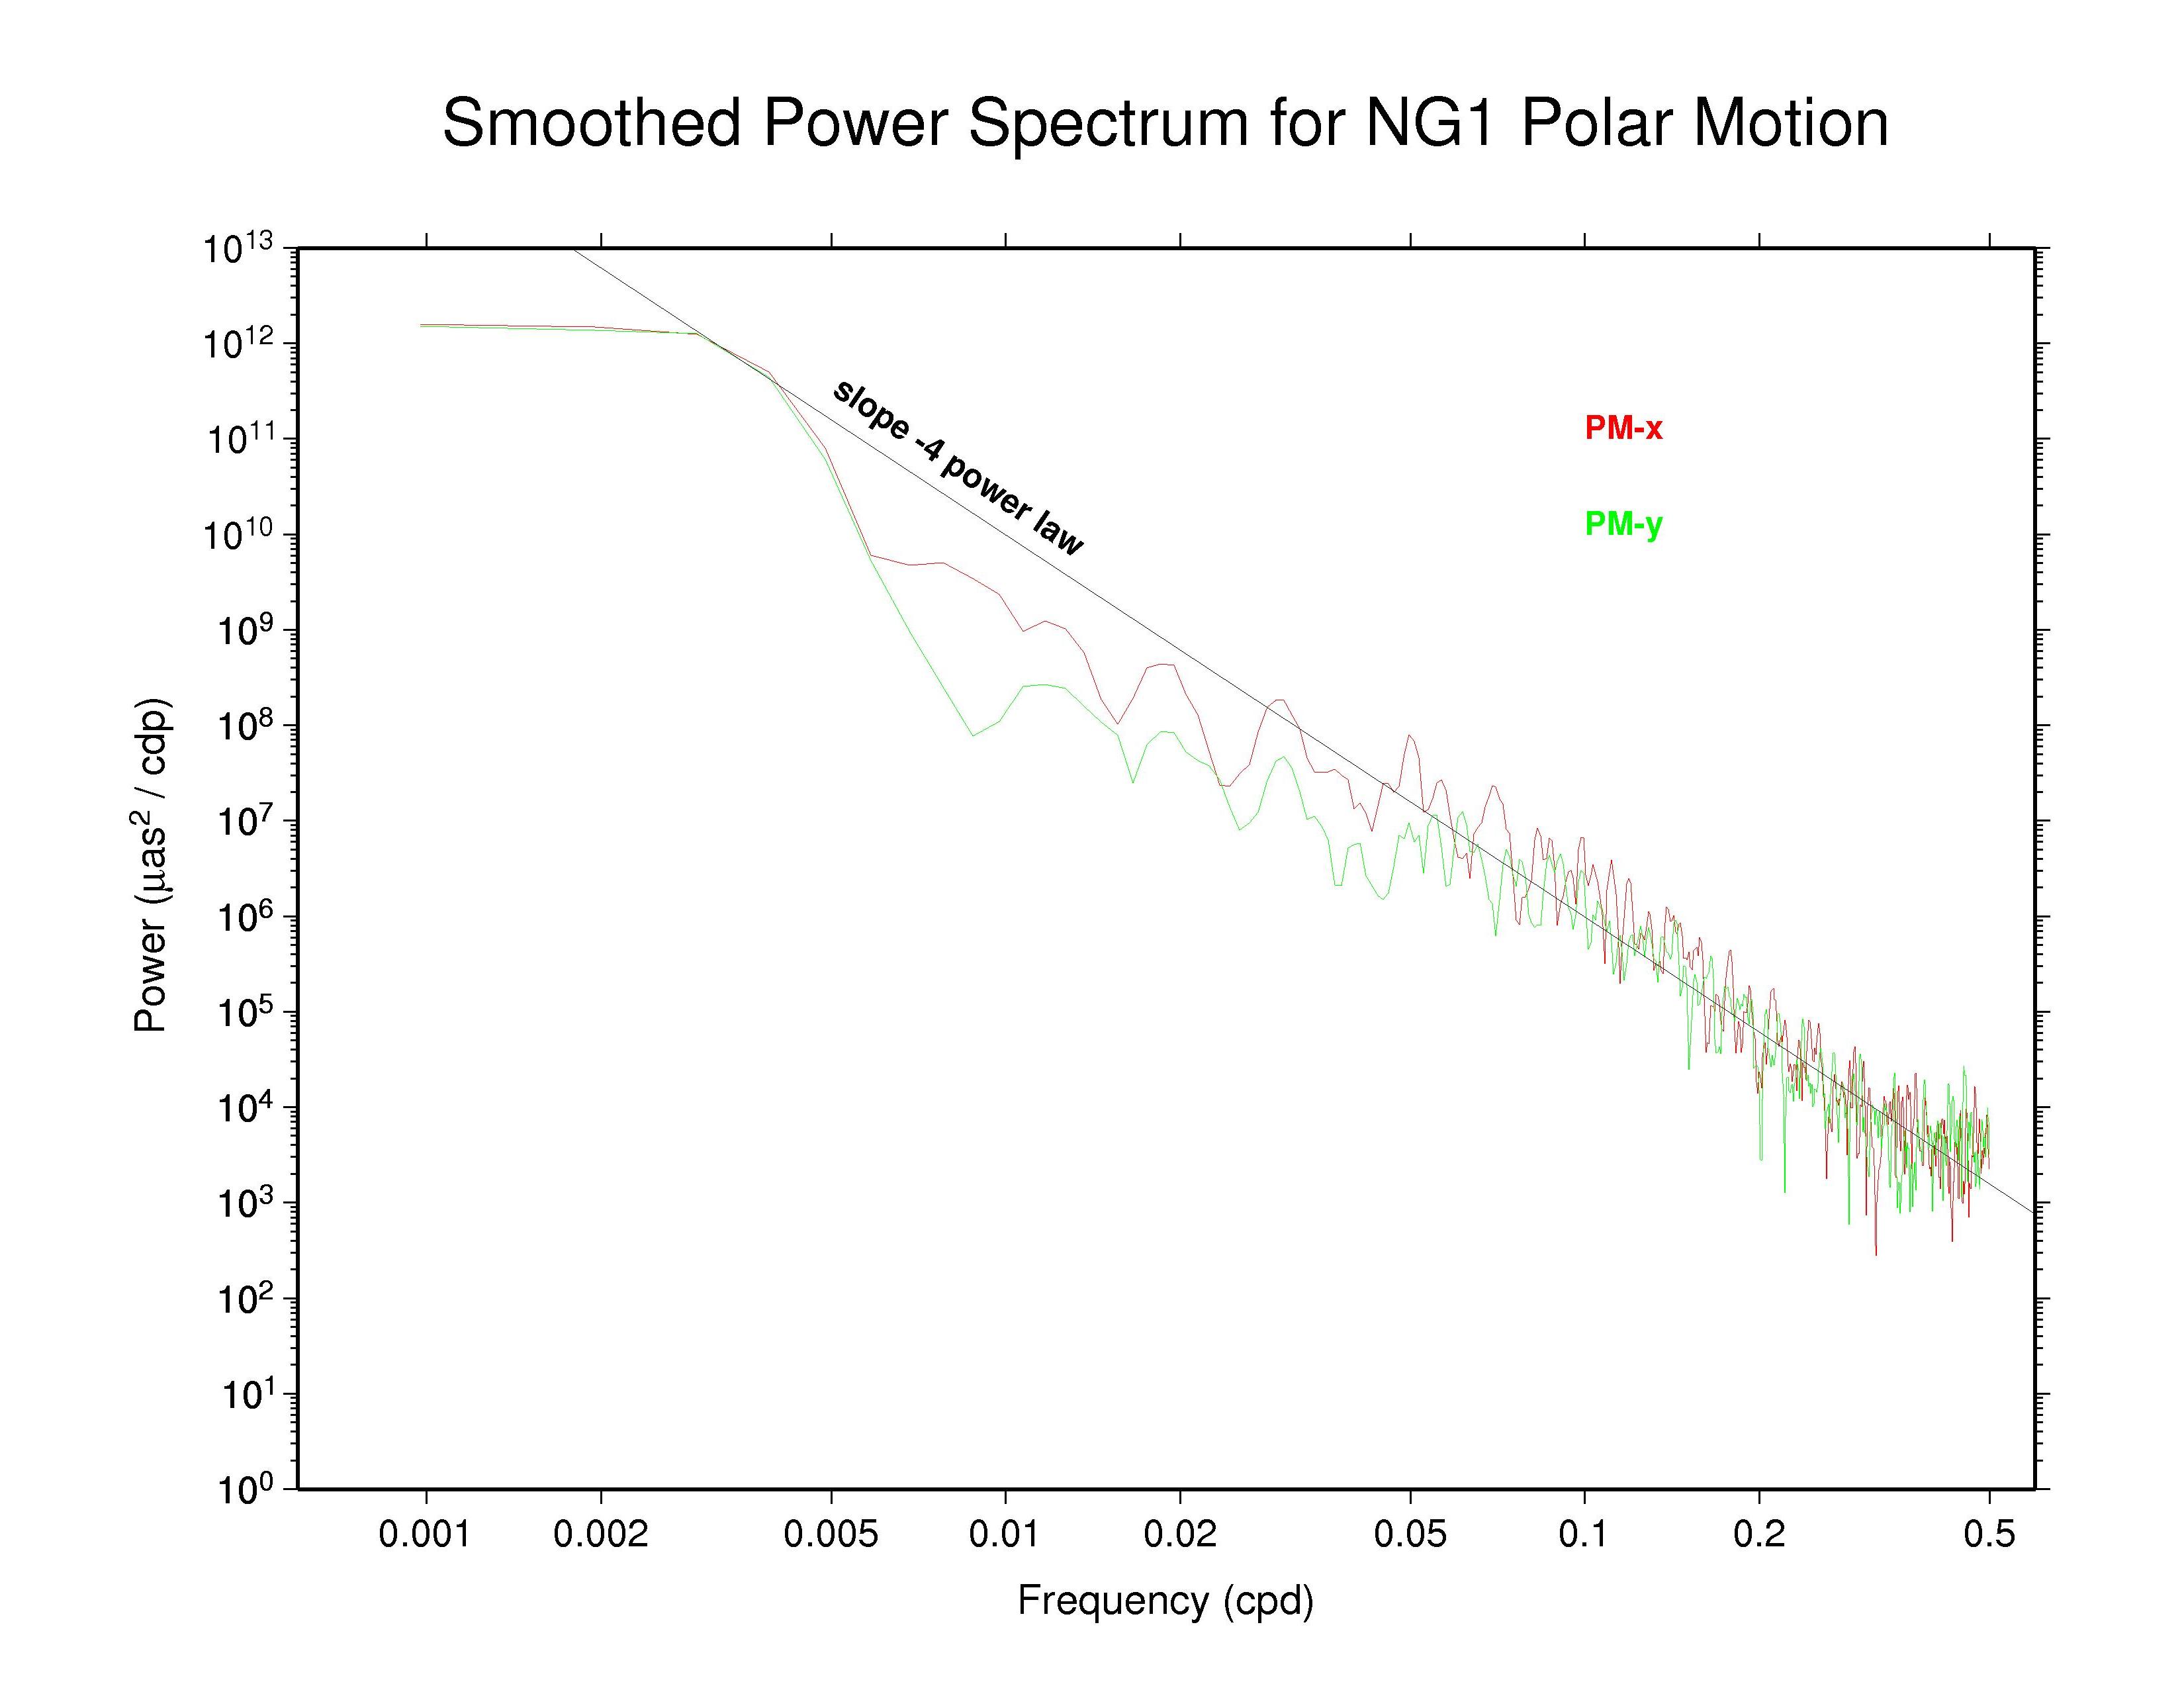 NGS polar motion spectra